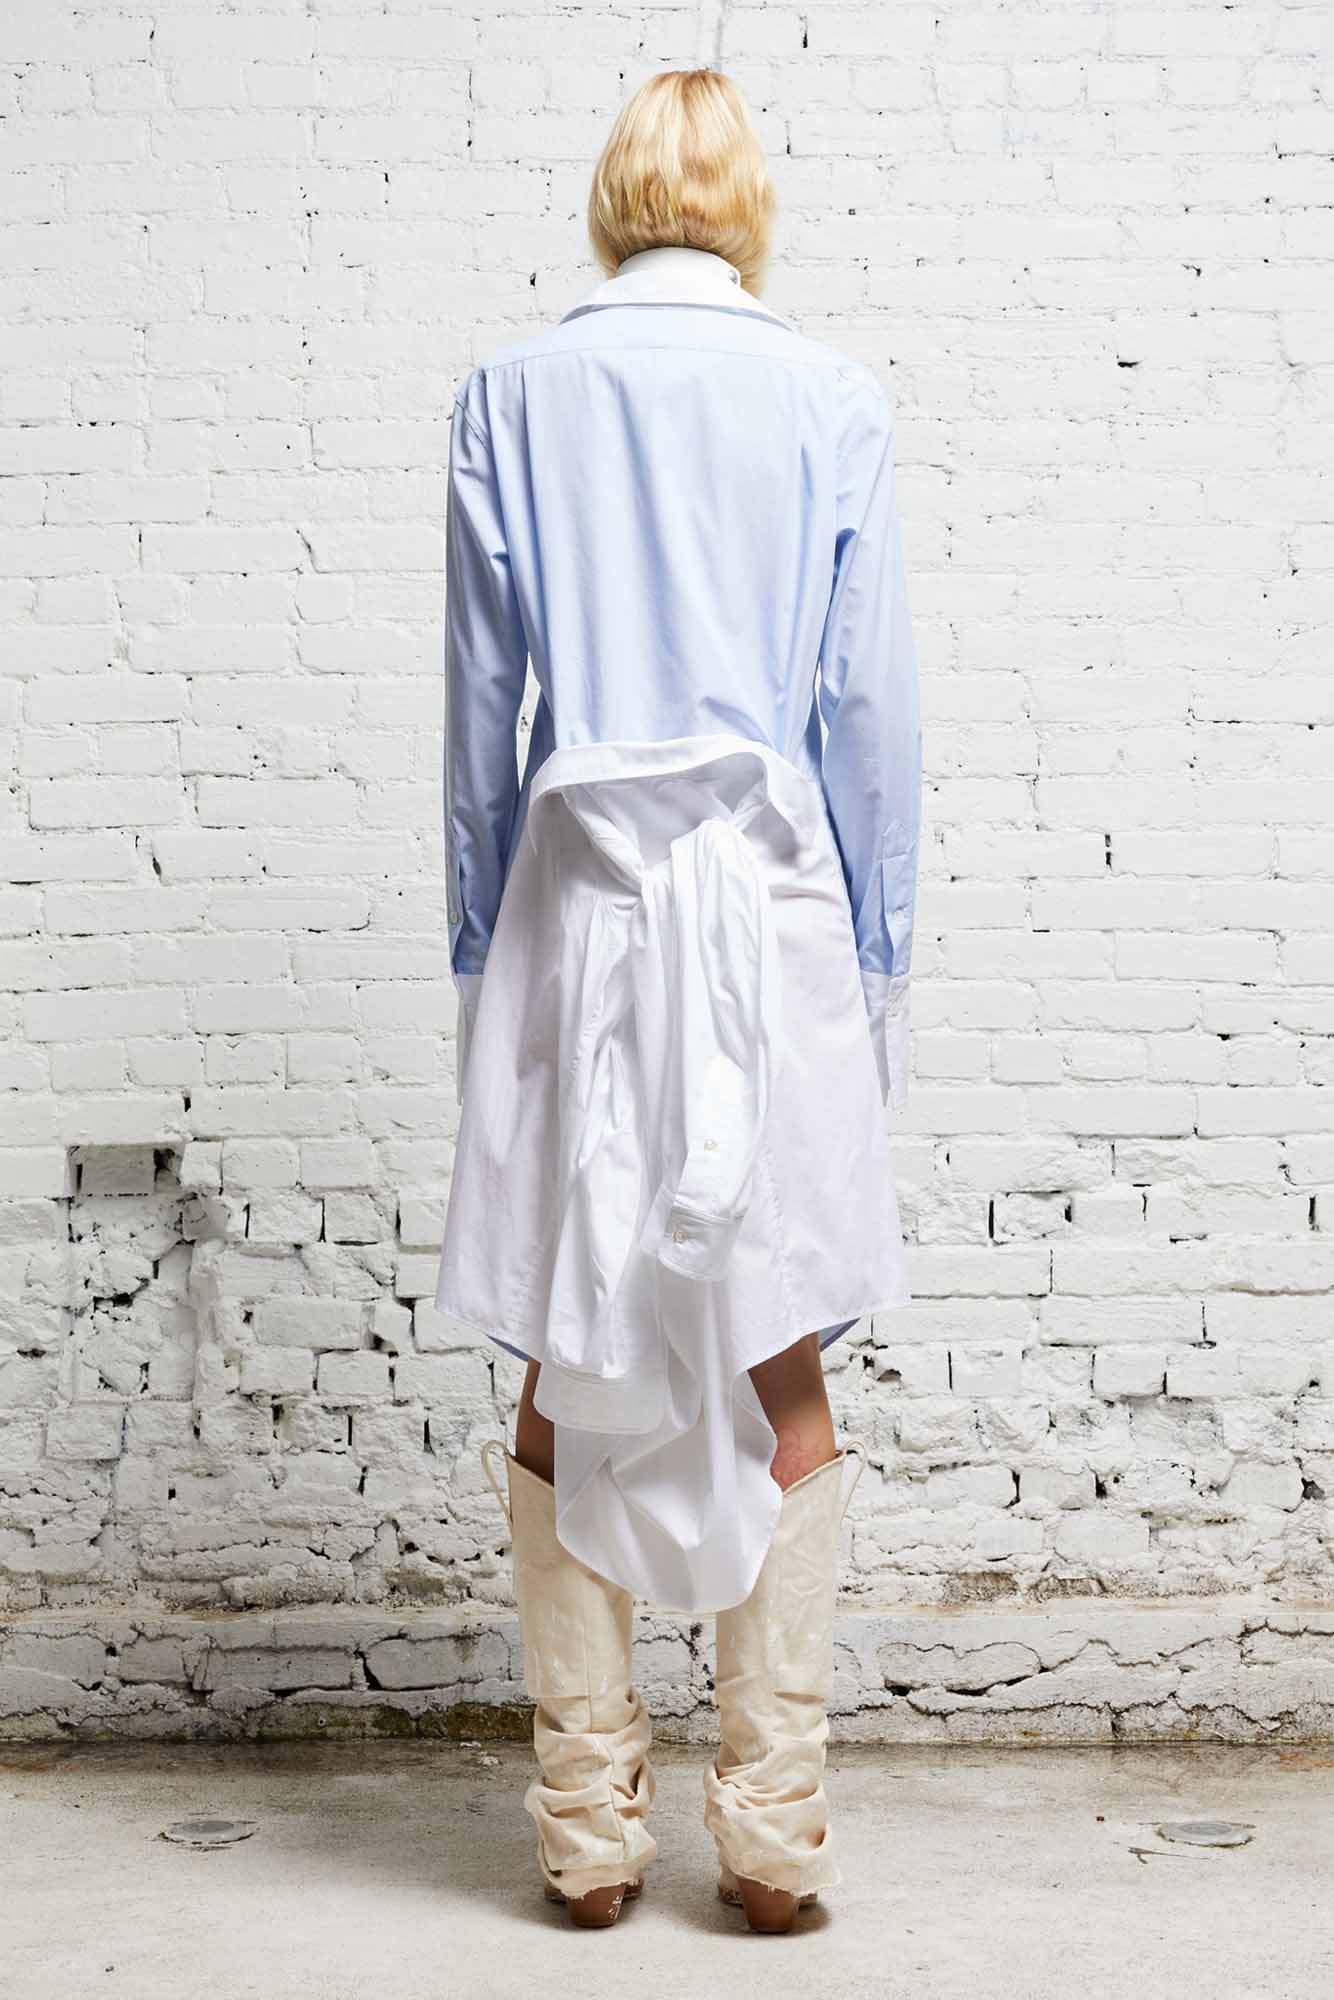 TIE SHIRTDRESS - BLUE AND WHITE